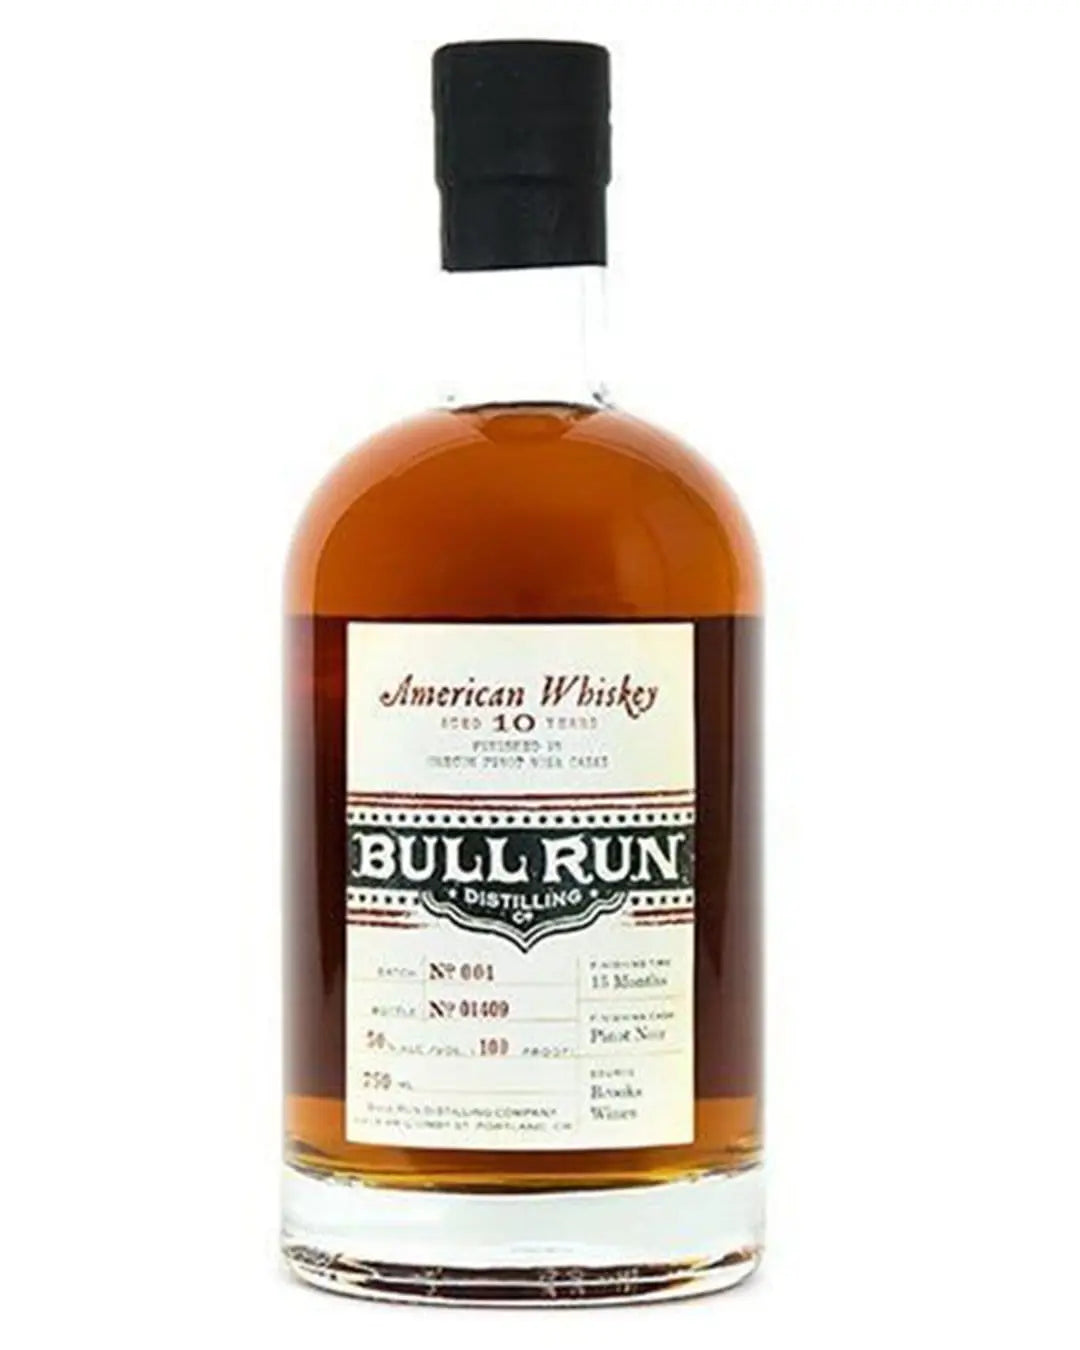 Bull Run Distilling Co. Pinot Noir Finish 13 Year Old American Whiskey, 75 cl Whisky